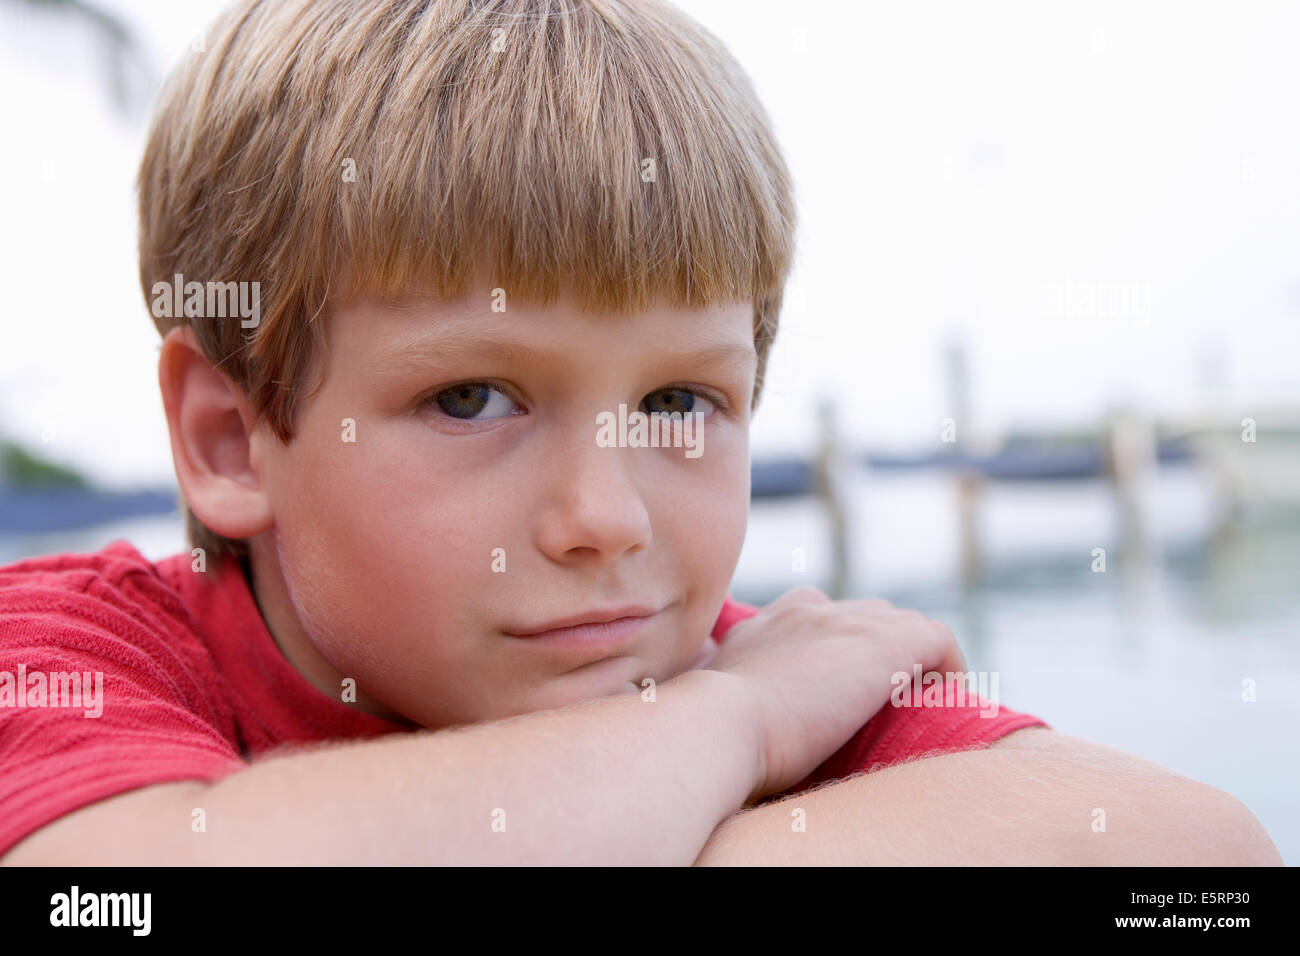 Young blond boy Stock Photo